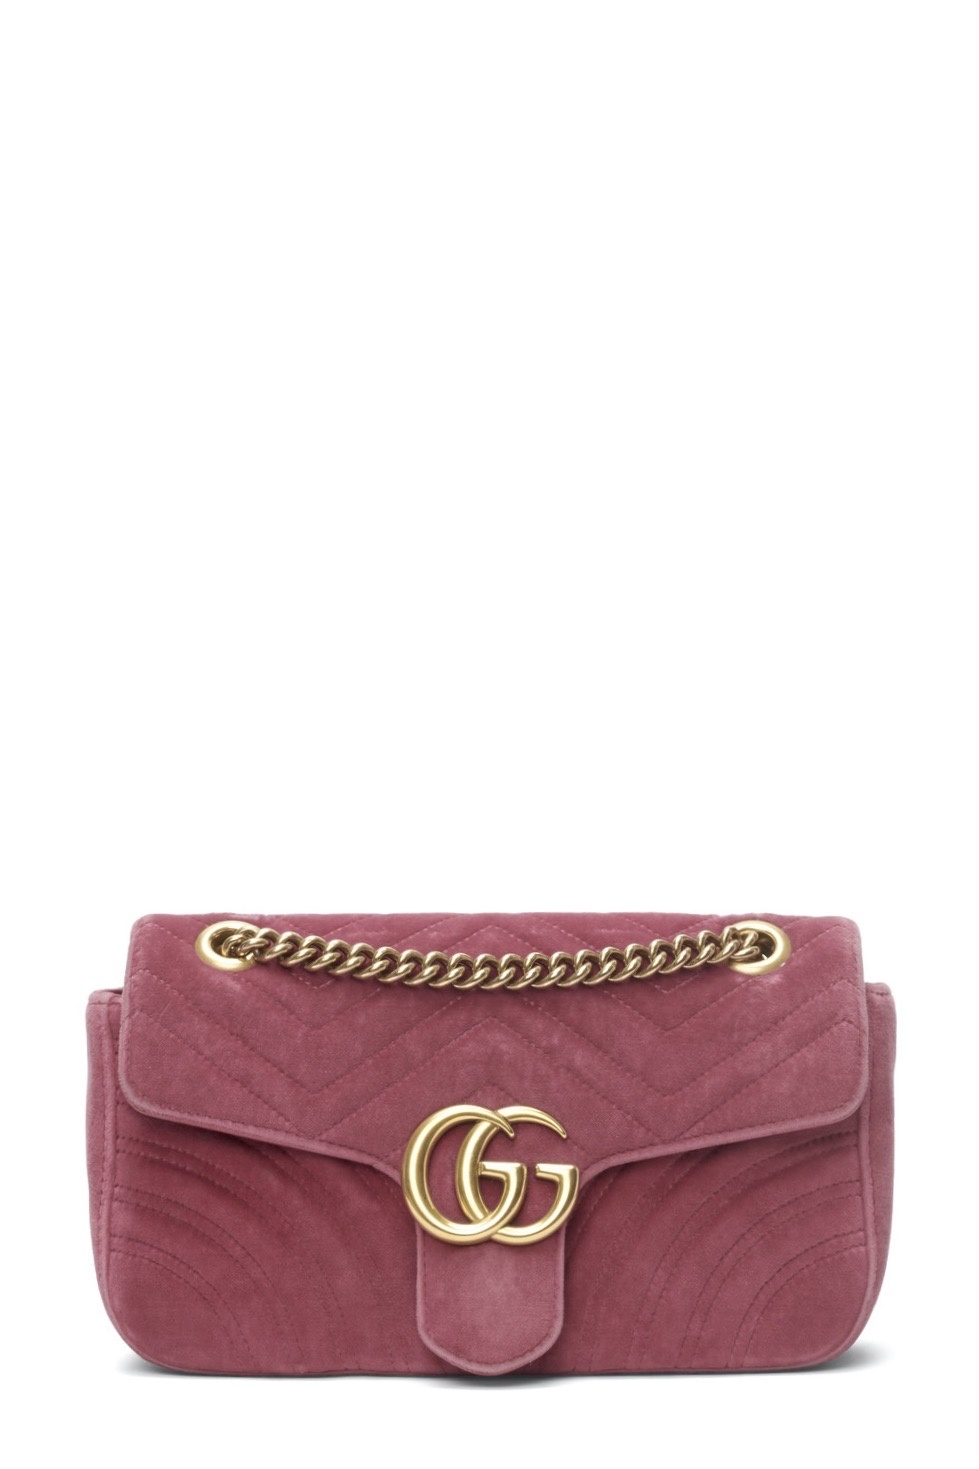 Gucci Pink Velvet Small GG Marmont Shoulder Bag - RETYCHE